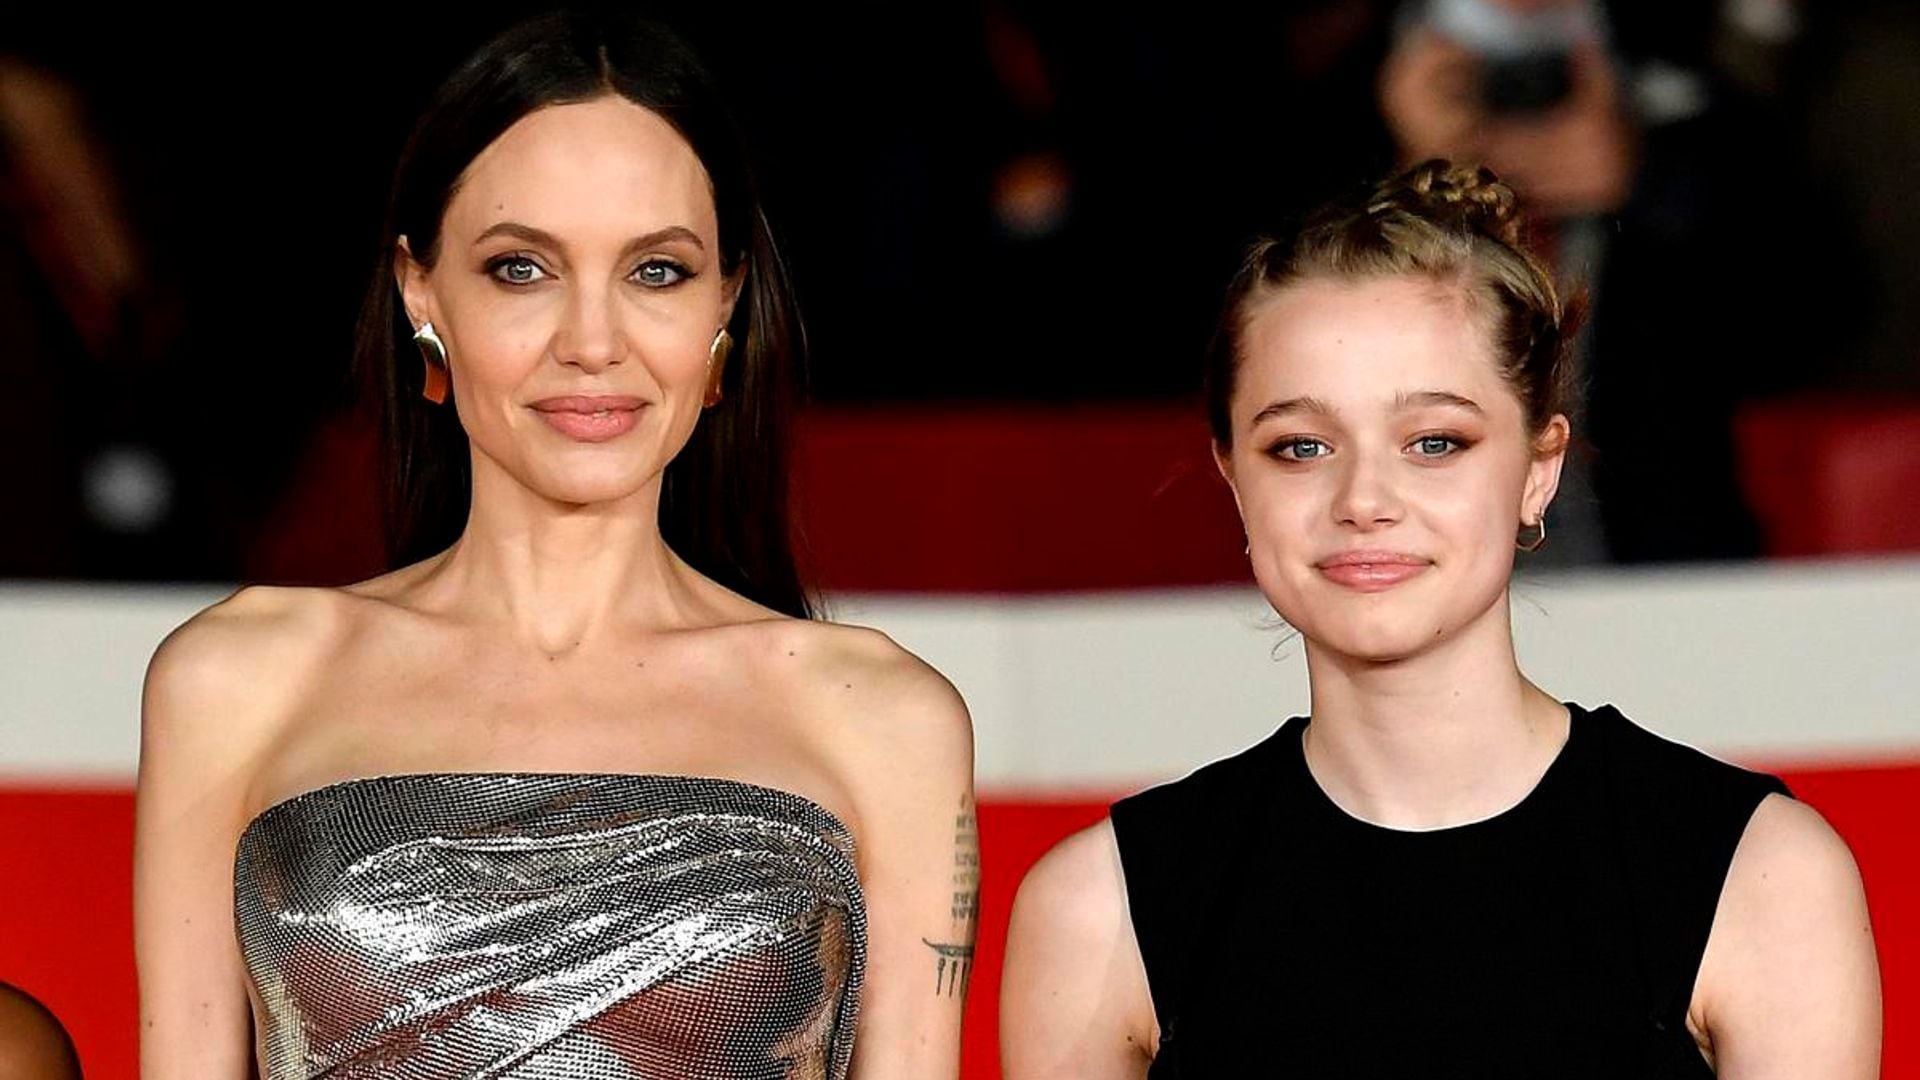 Shiloh Jolie-Pitt is celebrating her 18th birthday! Her choreographer opens up about her personality